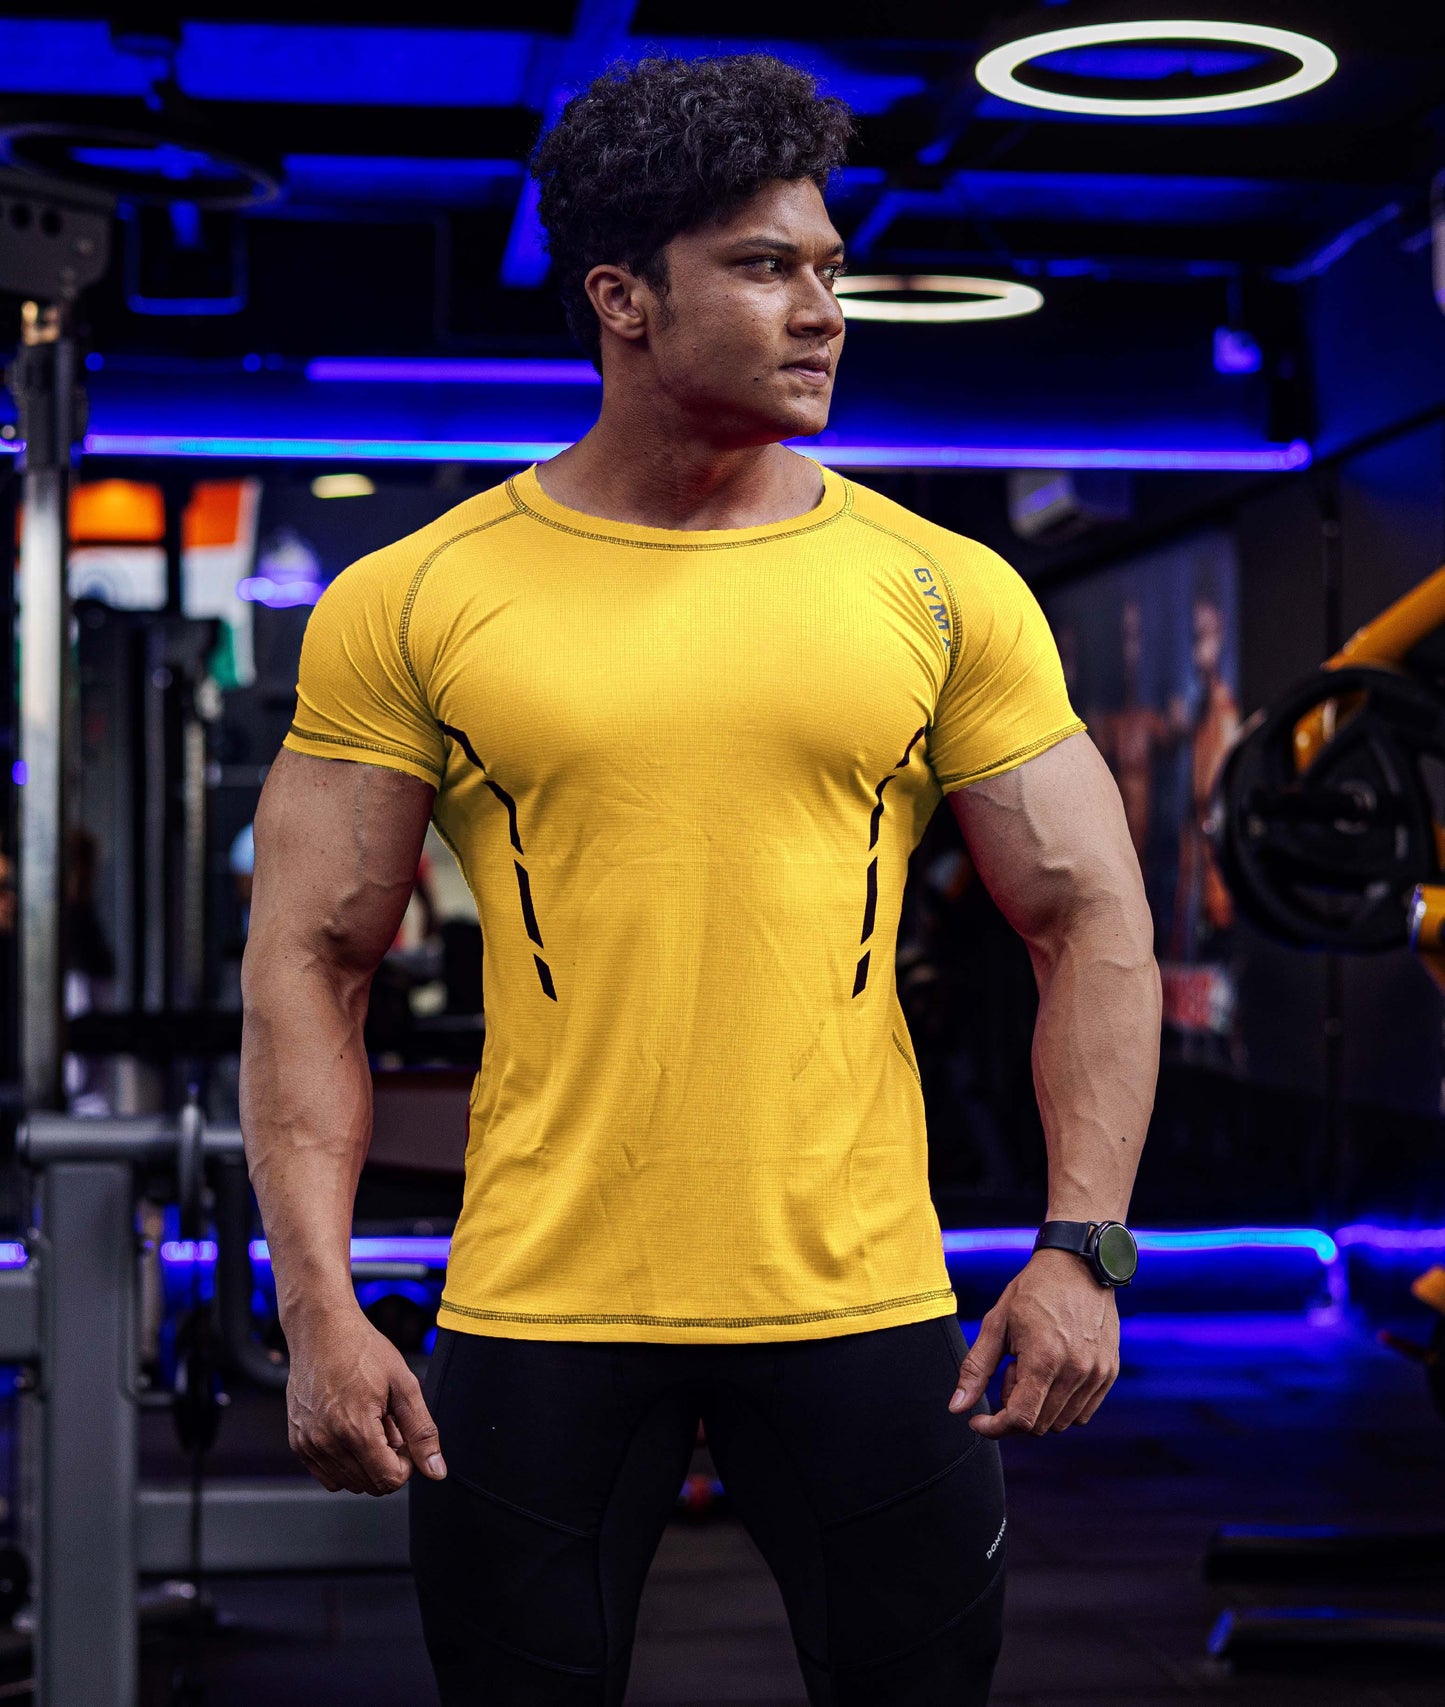 Buy GymX Super Hero Yellow tee for Gym, Workout, Fitness, Running and  Sports. Polyester Fabric (Medium, m) at